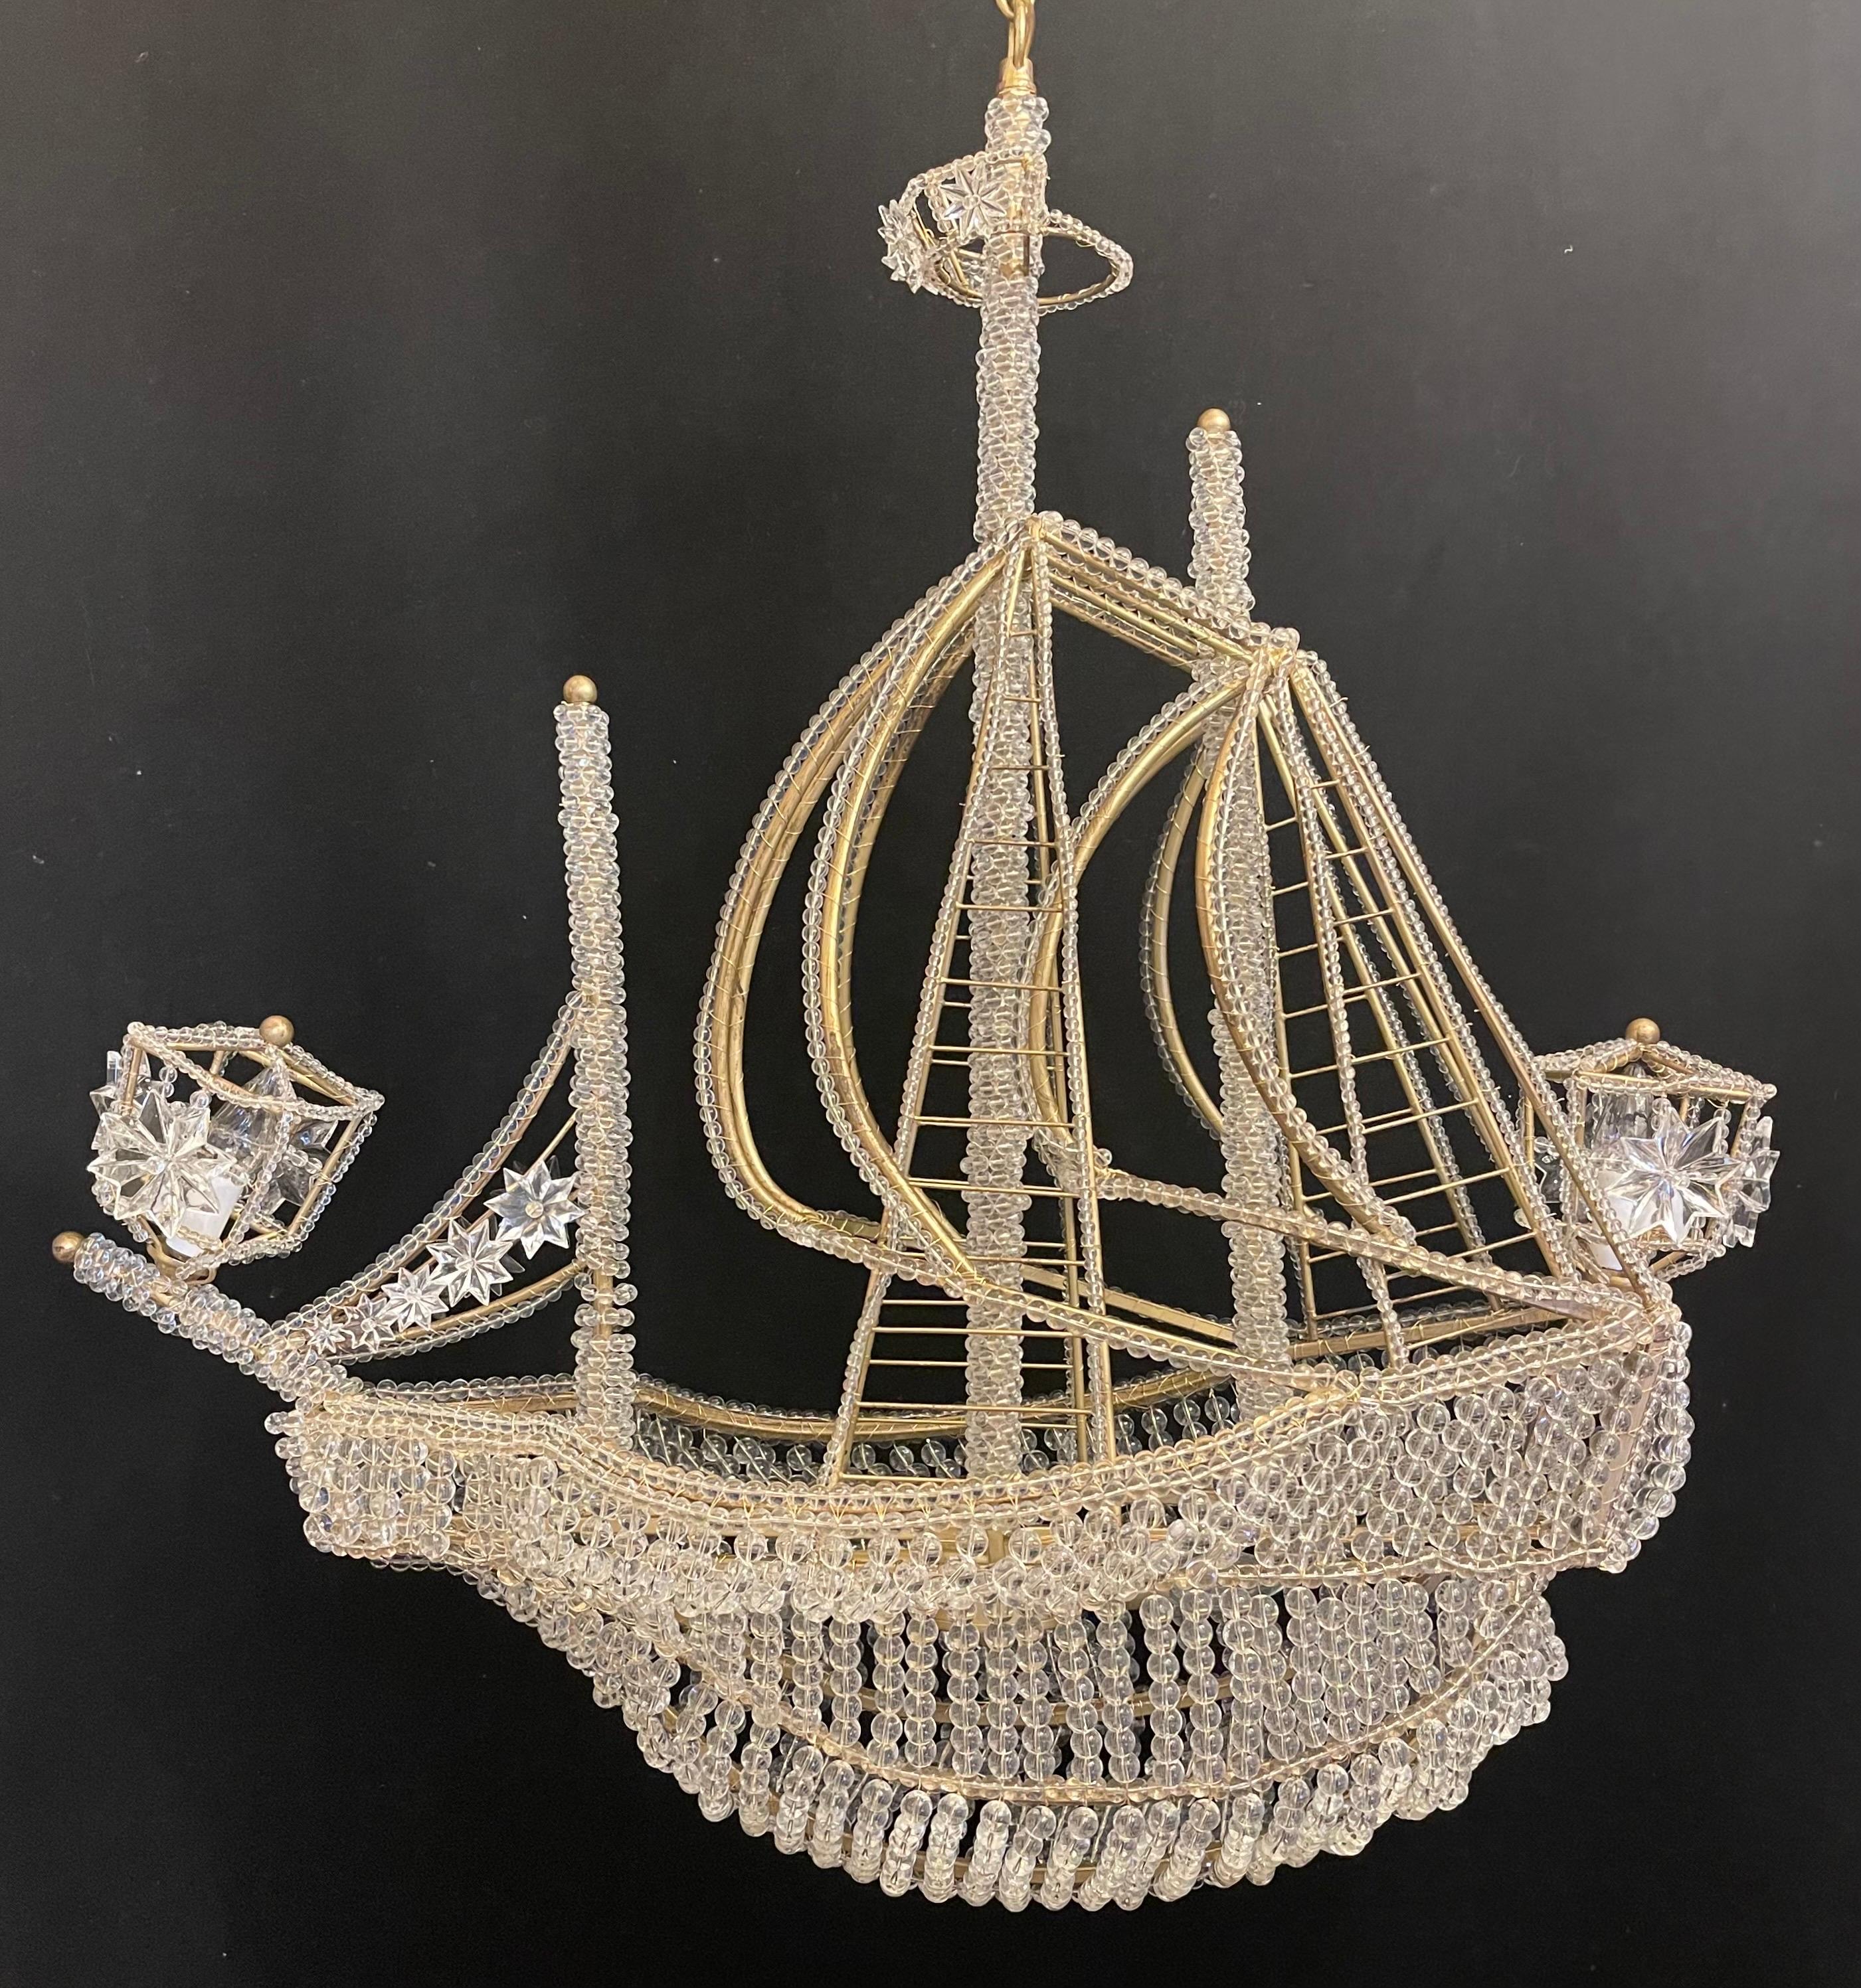 A wonderful boat / ship chandelier that is beautifully detailed with a beaded crystal hull and sails crystal star accents throughout. Outfitted with 4 internal lights two in the main hull and two in the lanterns, In the manner of Baguès.
This would